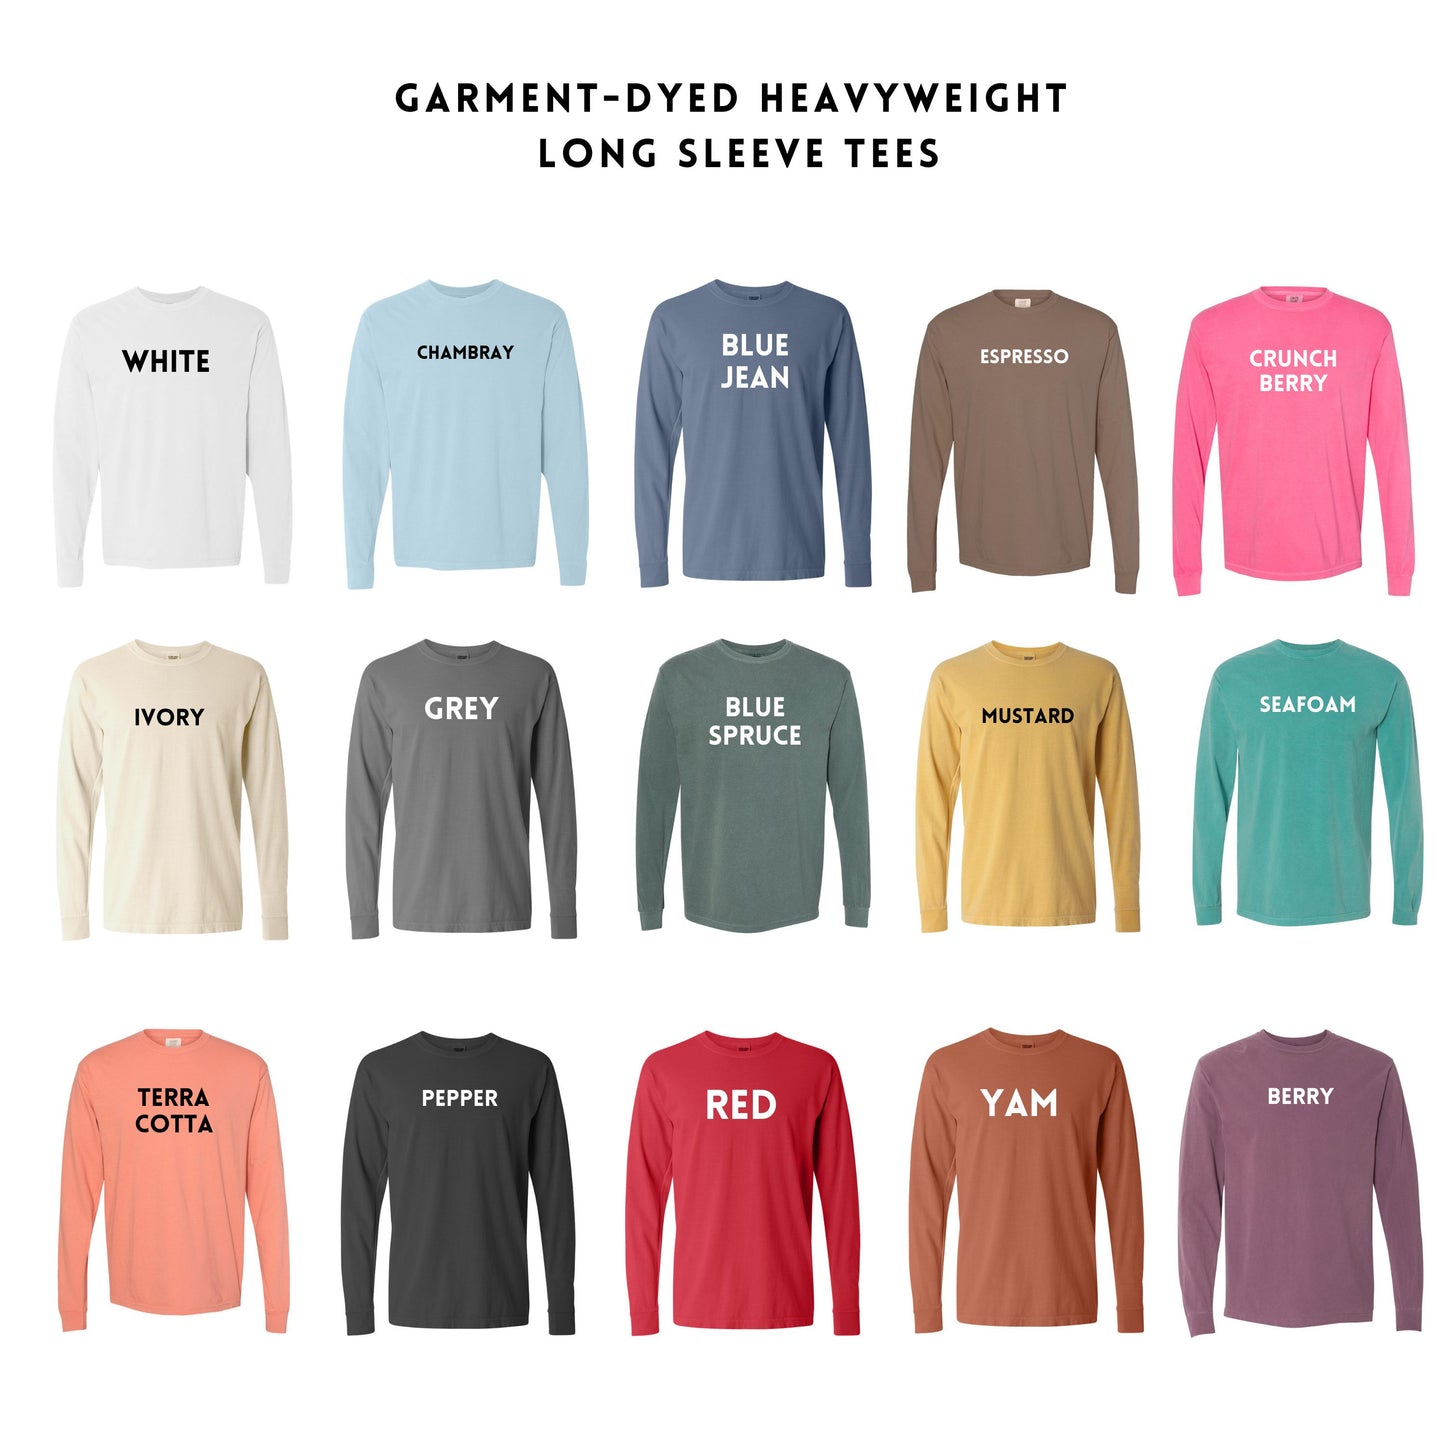 Campfires And Cuddles | Garment Dyed Long Sleeve Tee